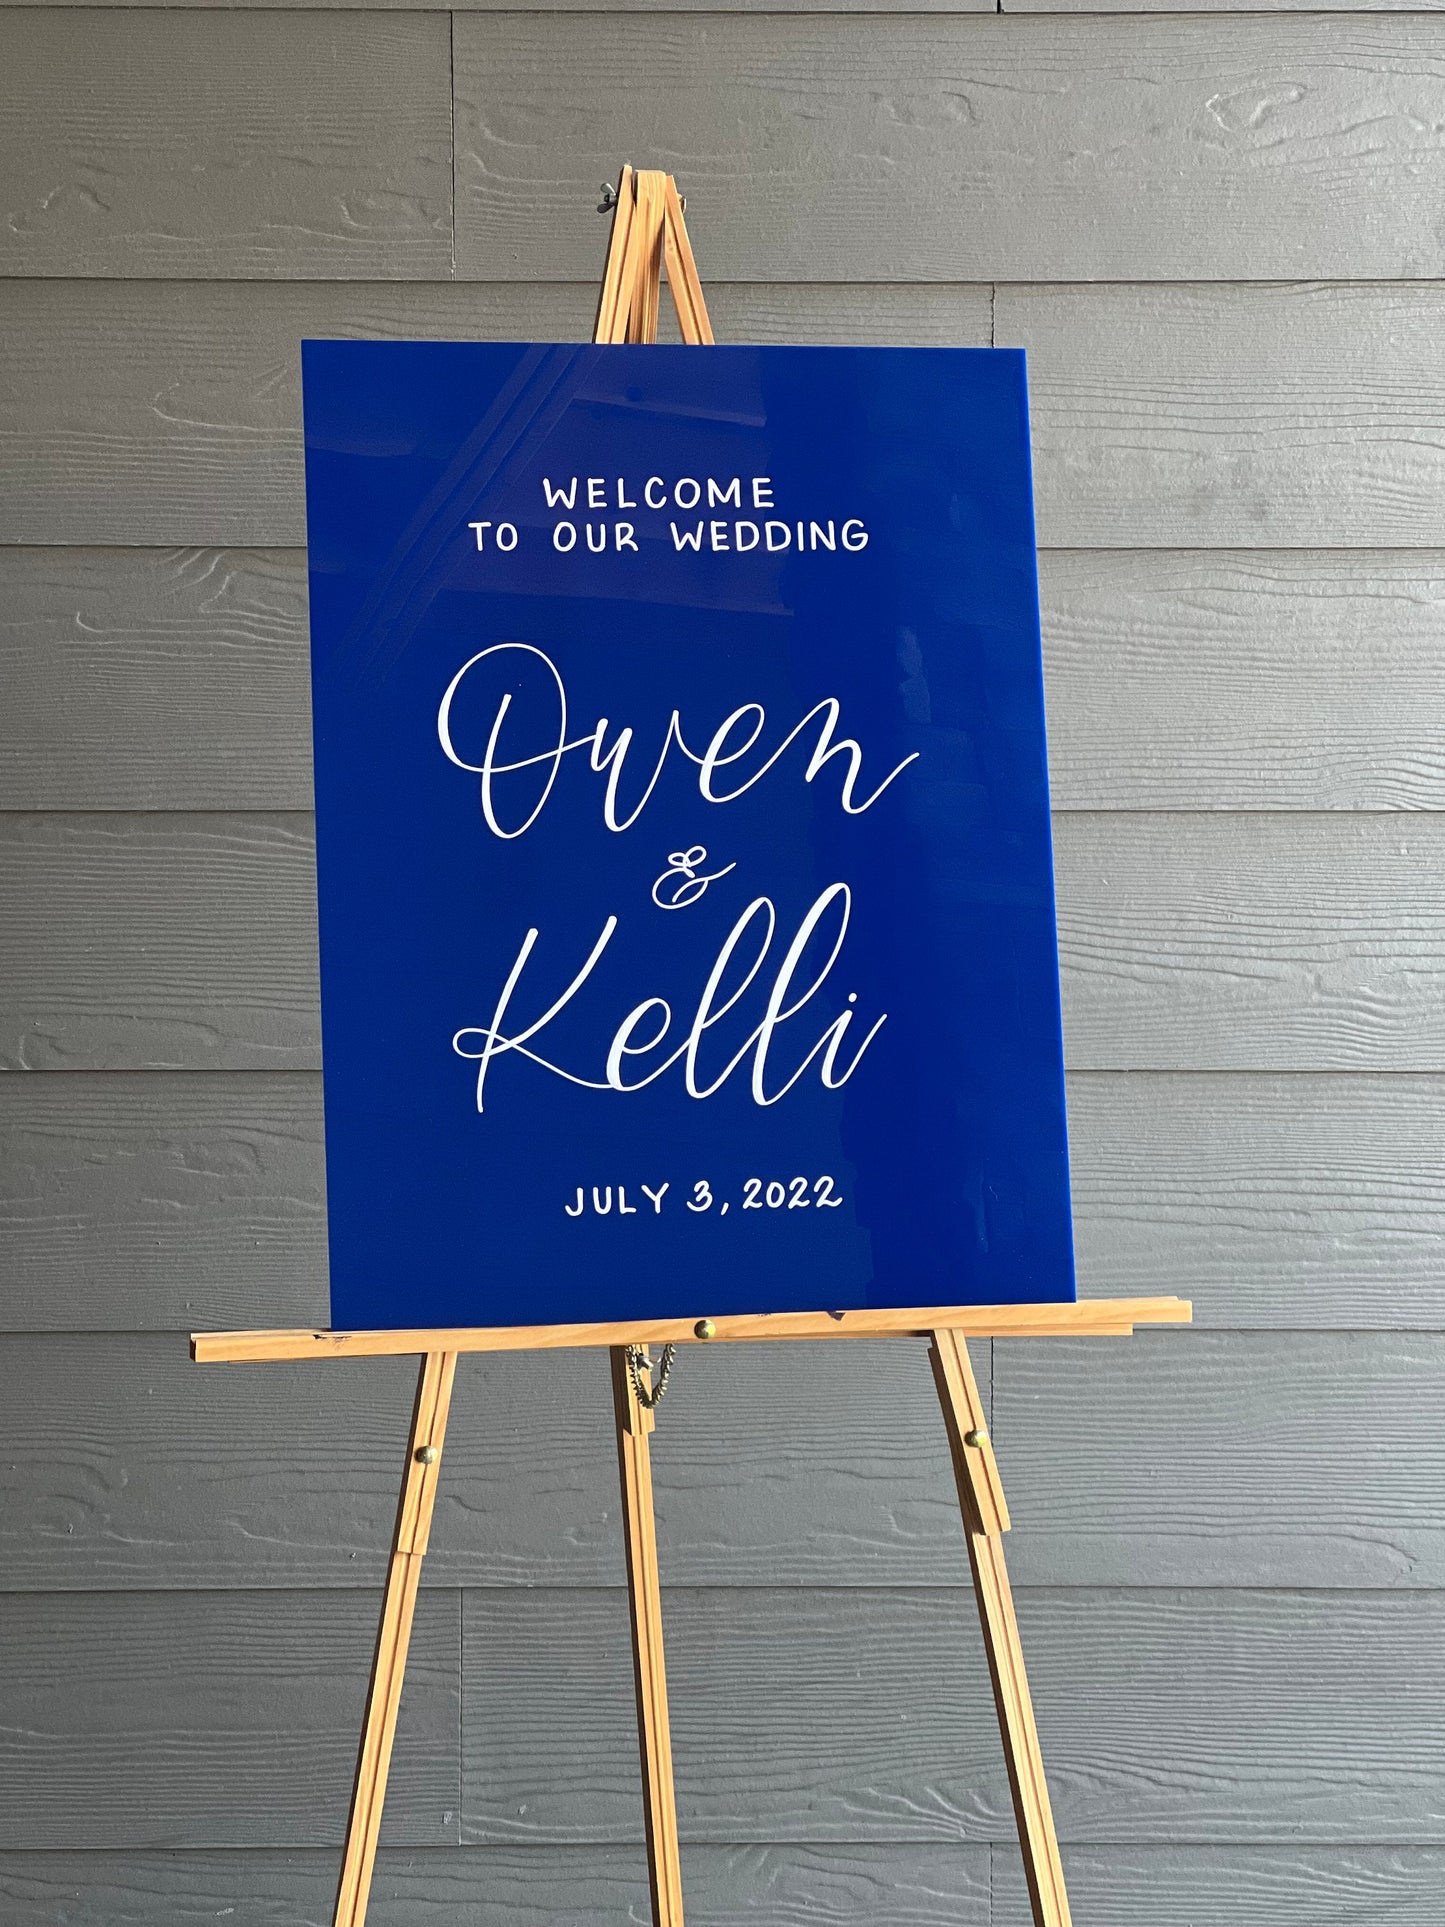 Solid Navy Blue Acrylic Wedding Welcome Sign | Modern Chic Wedding Welcome Sign | Birthday Party Sign